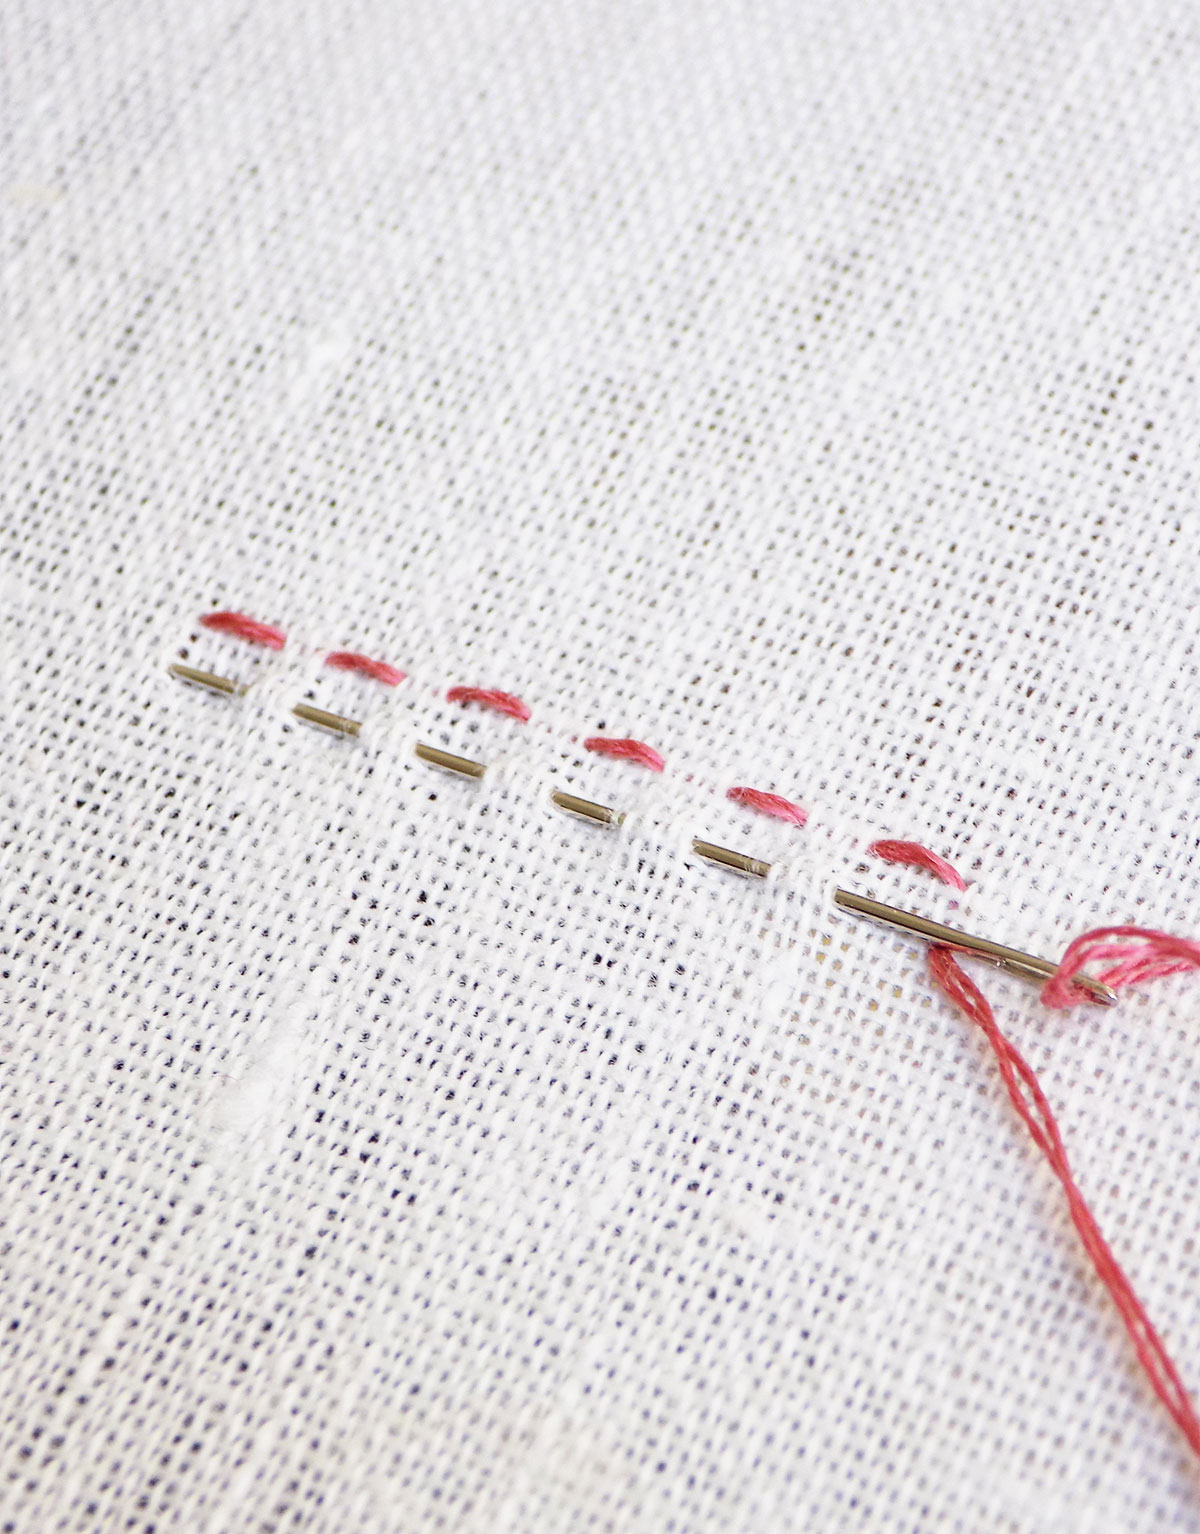 Hand embroidery for beginners, Basic Embroidery stitches for beginners